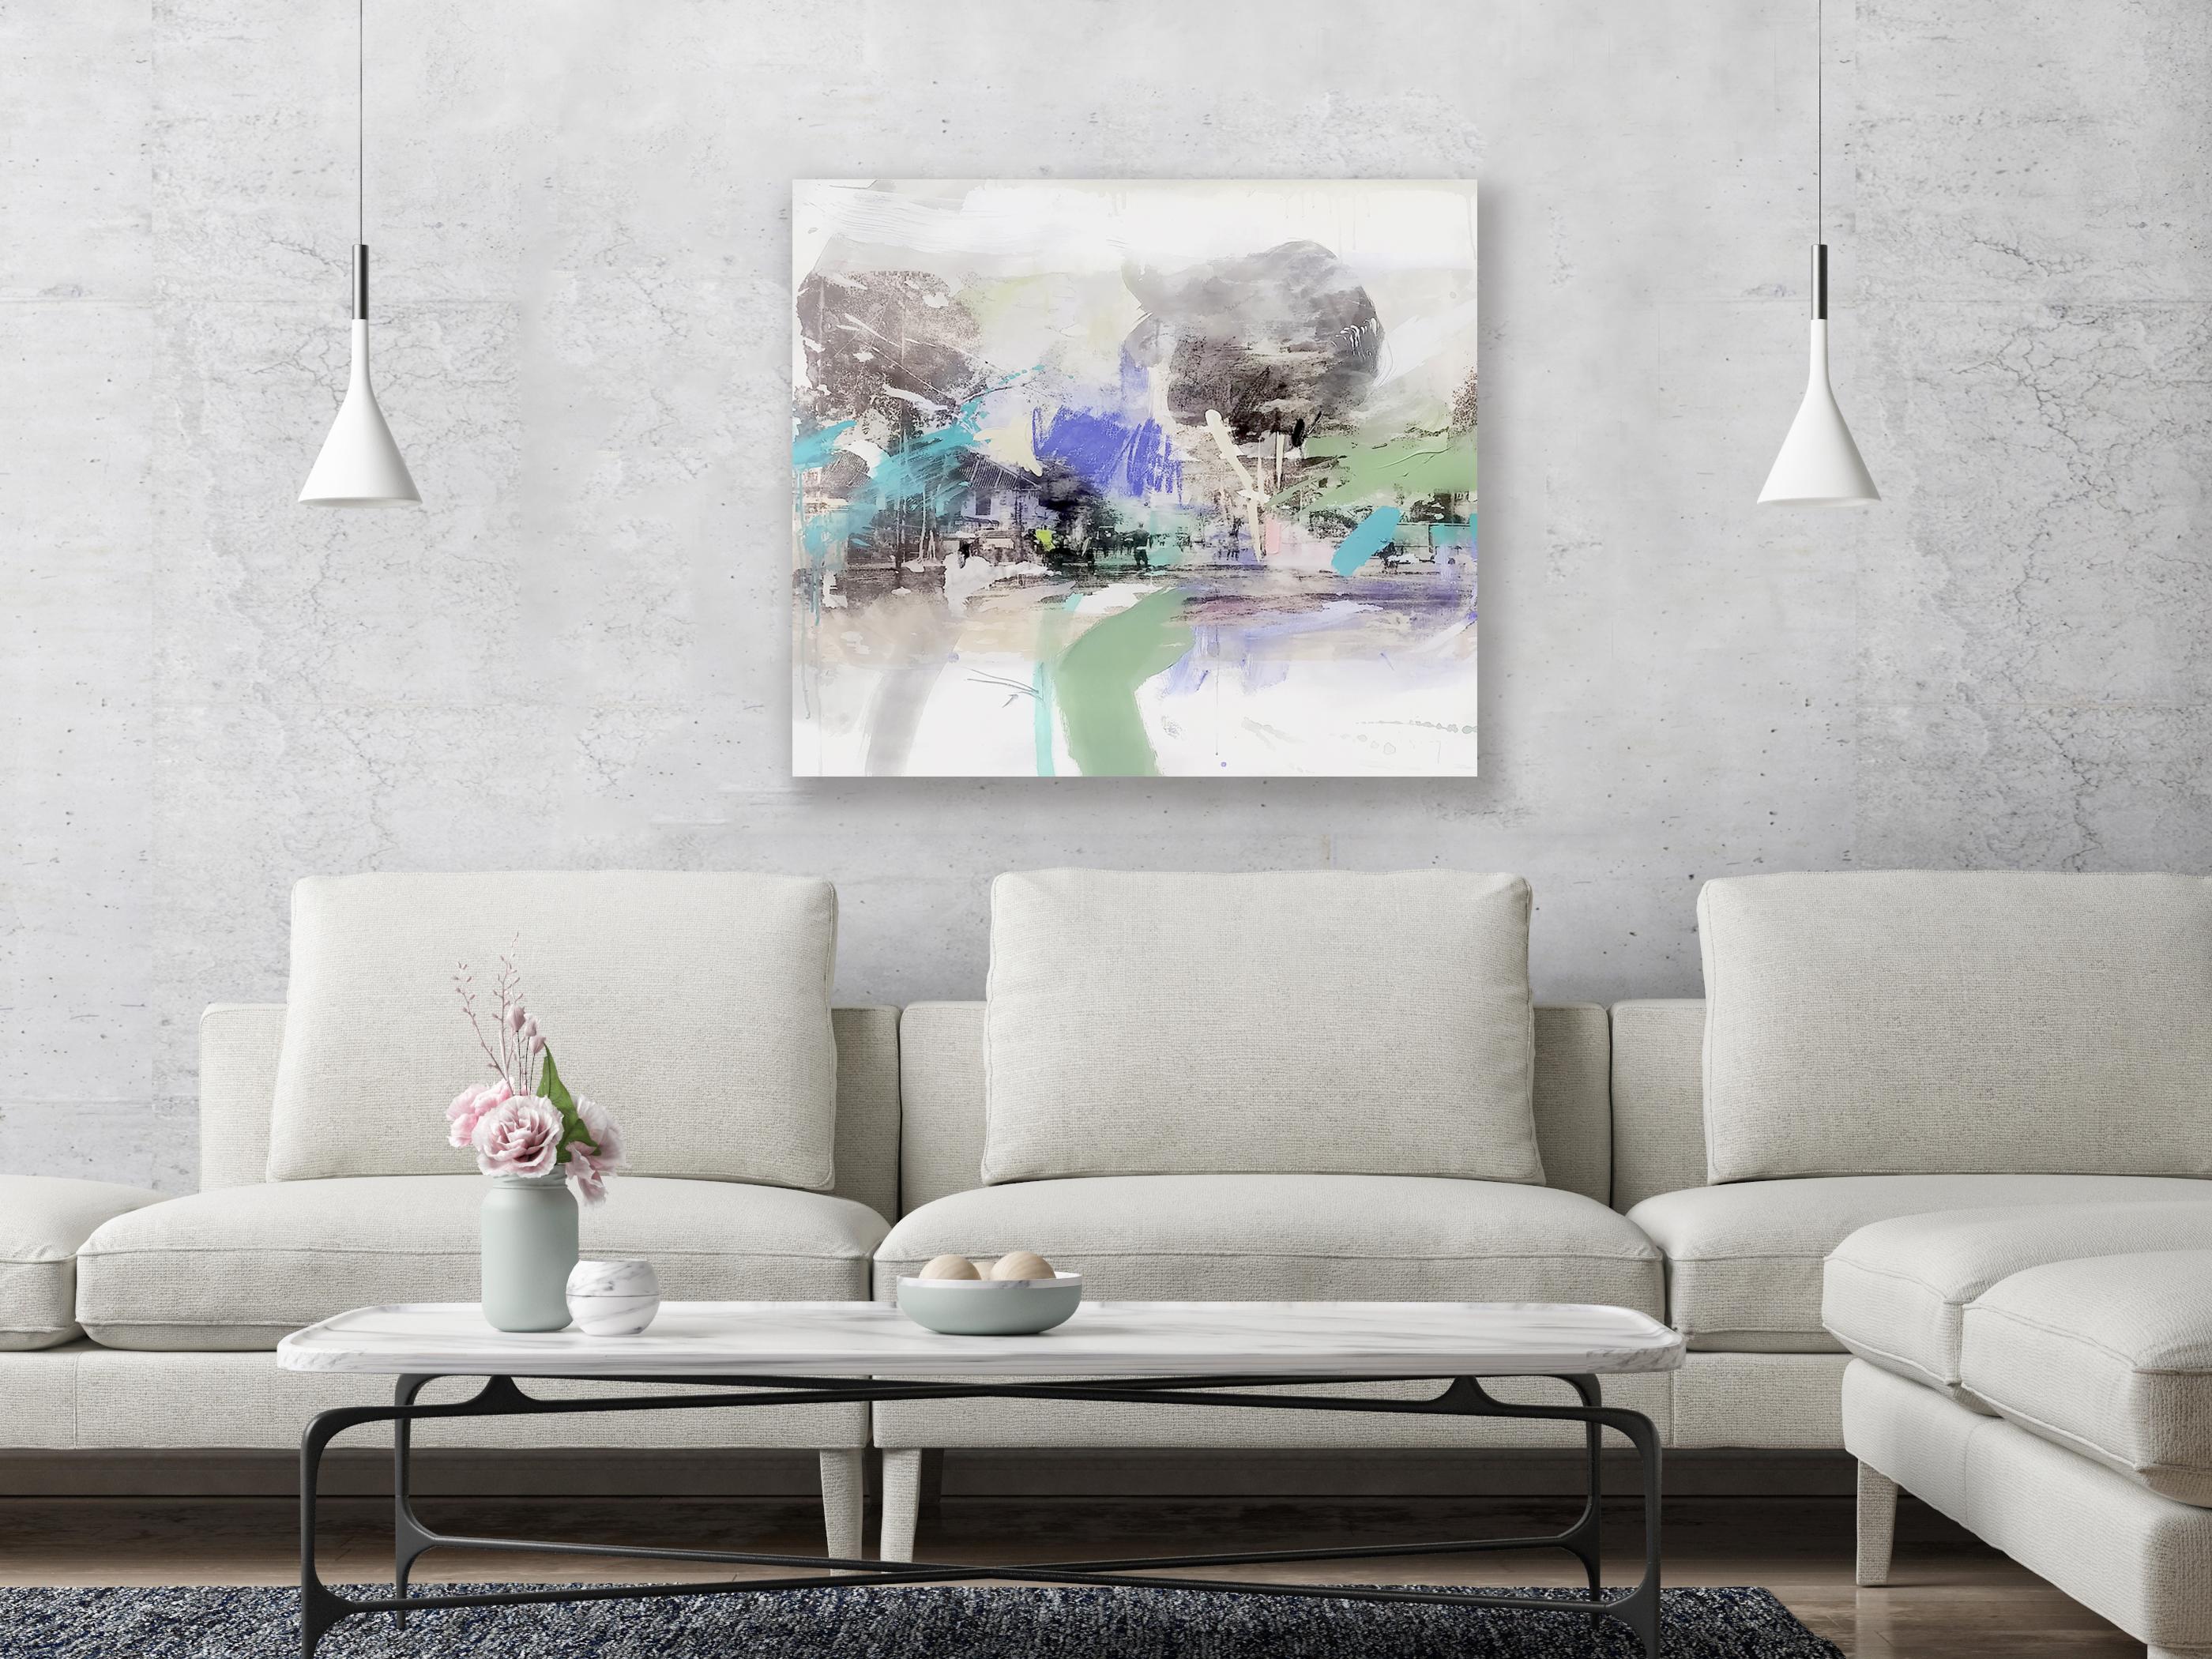 Blue Morning - Gray Abstract Painting by Alba Escayo